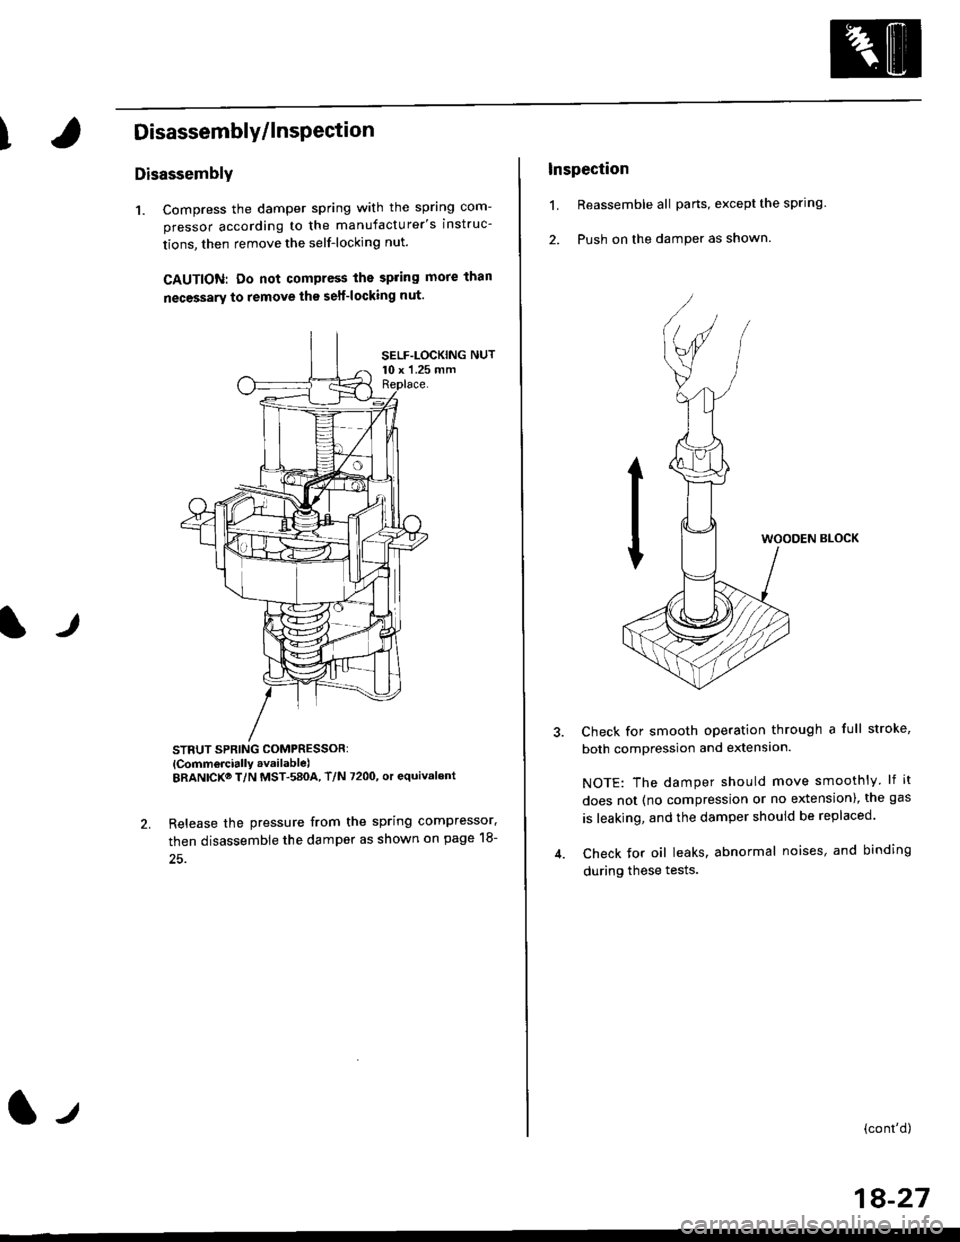 HONDA CIVIC 1997 6.G Workshop Manual IDisassembly/lnsPection
lr
Disassembly
1. Compress the damper spring with the spring com-
pressor according to the manufacturers instruc-
tions, then remove the self-locking nut.
GAUTION: Do not comp